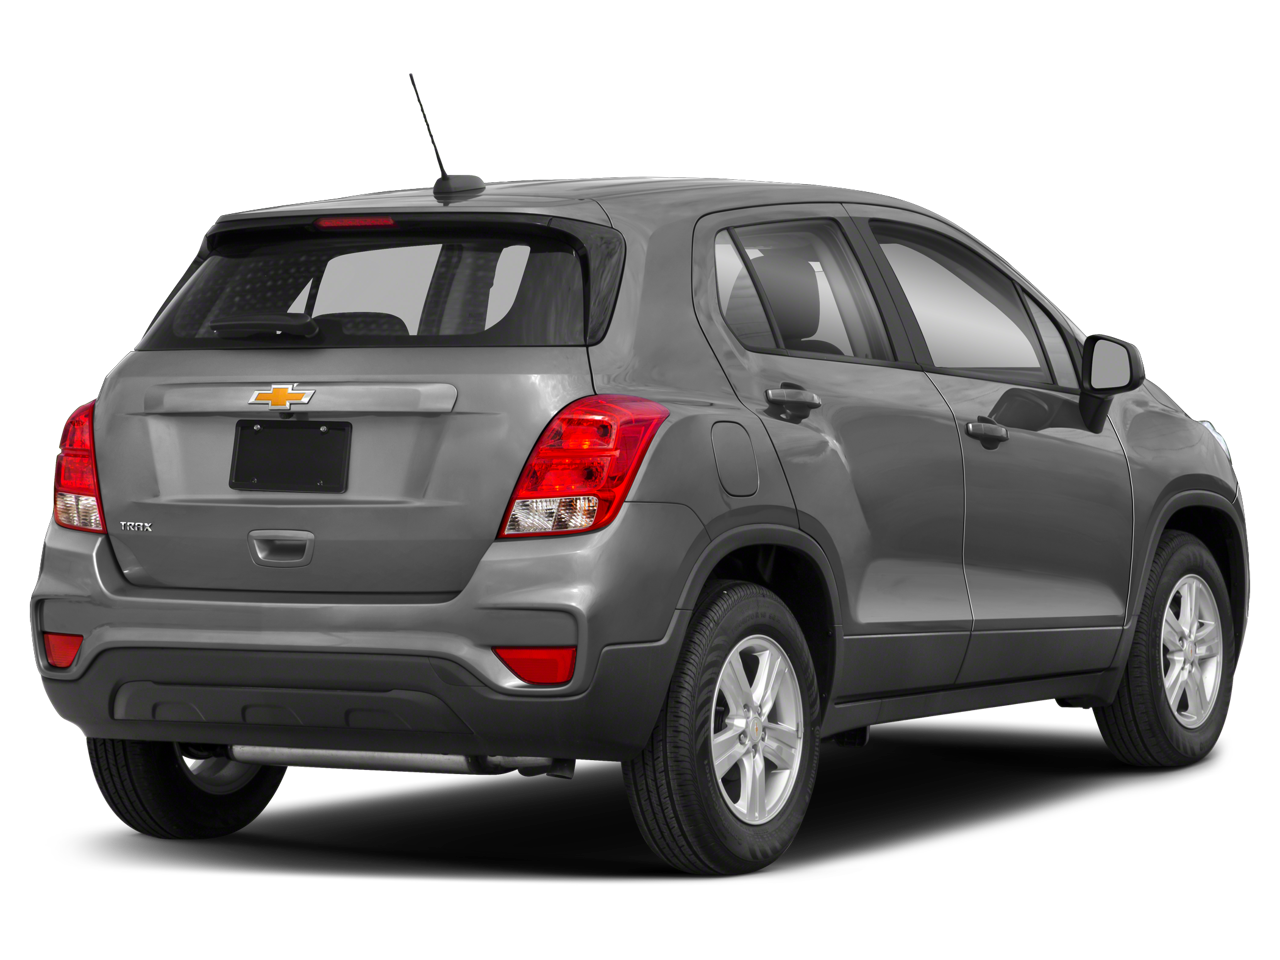 Certified 2020 Chevrolet Trax LS with VIN 3GNCJKSB9LL298230 for sale in Santa Fe, NM